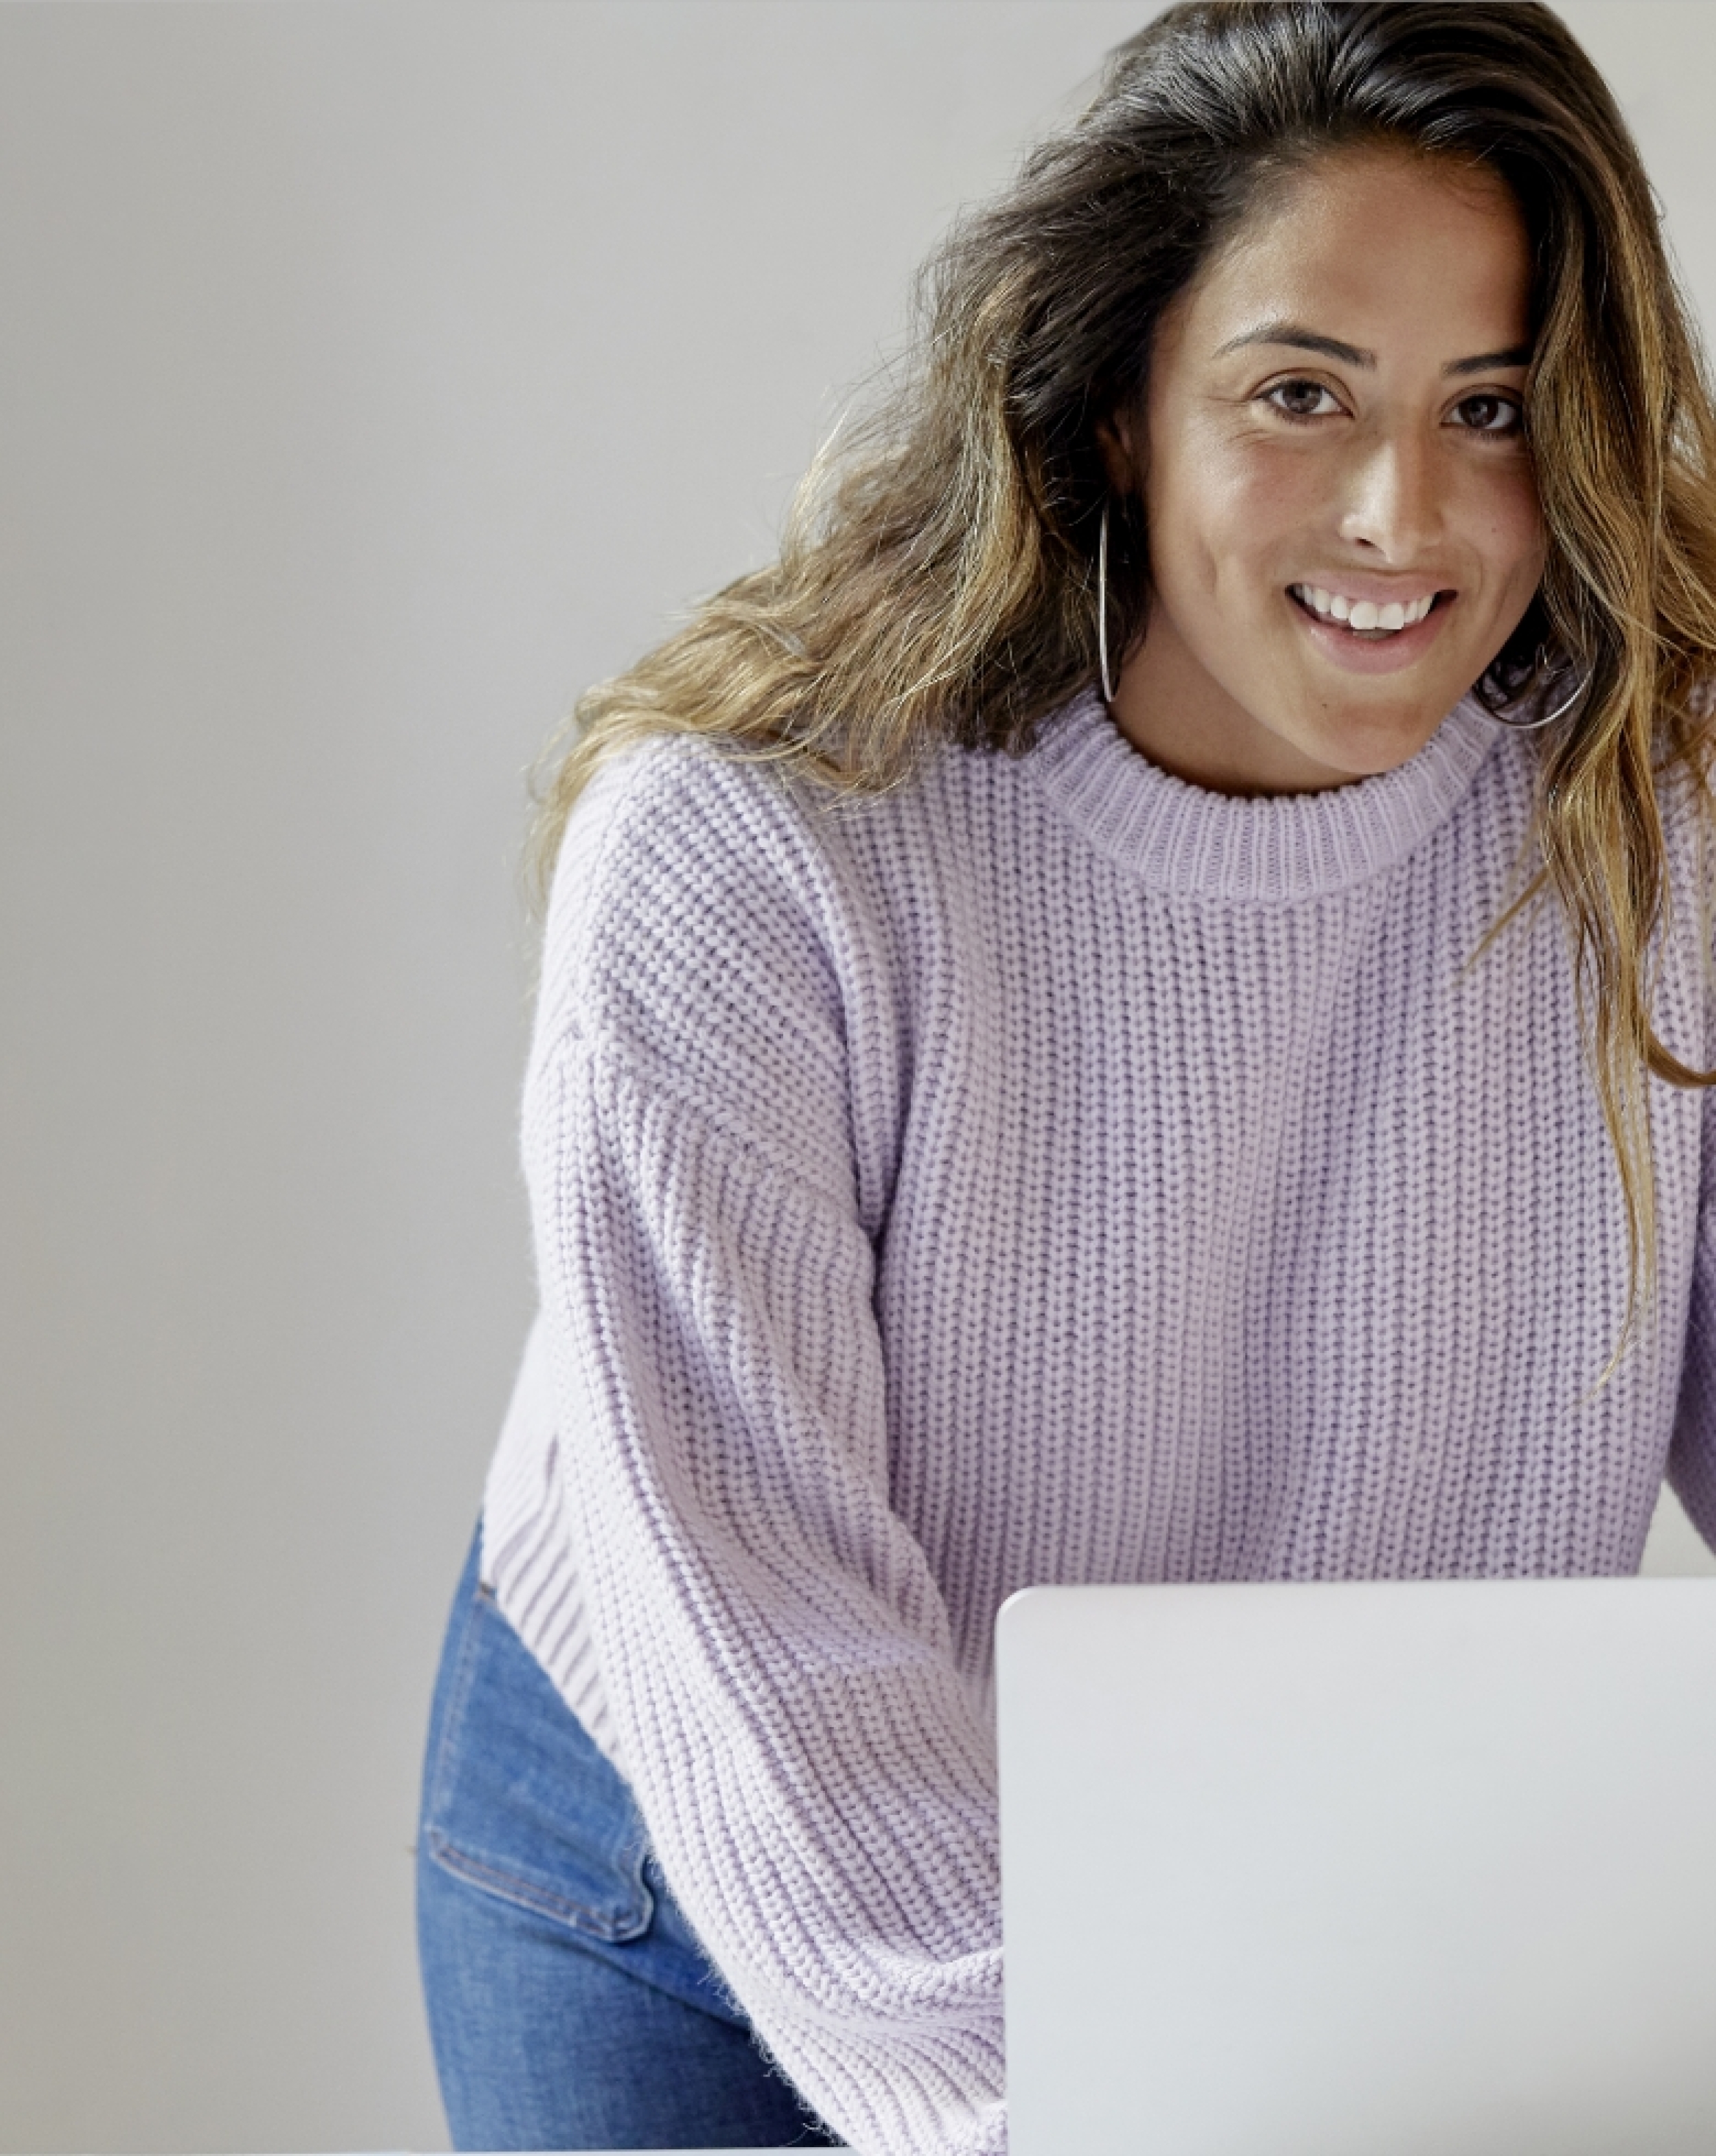 Young friendly looking woman in lilac jumper in working environment smiling at the camera with a laptop in front of her.